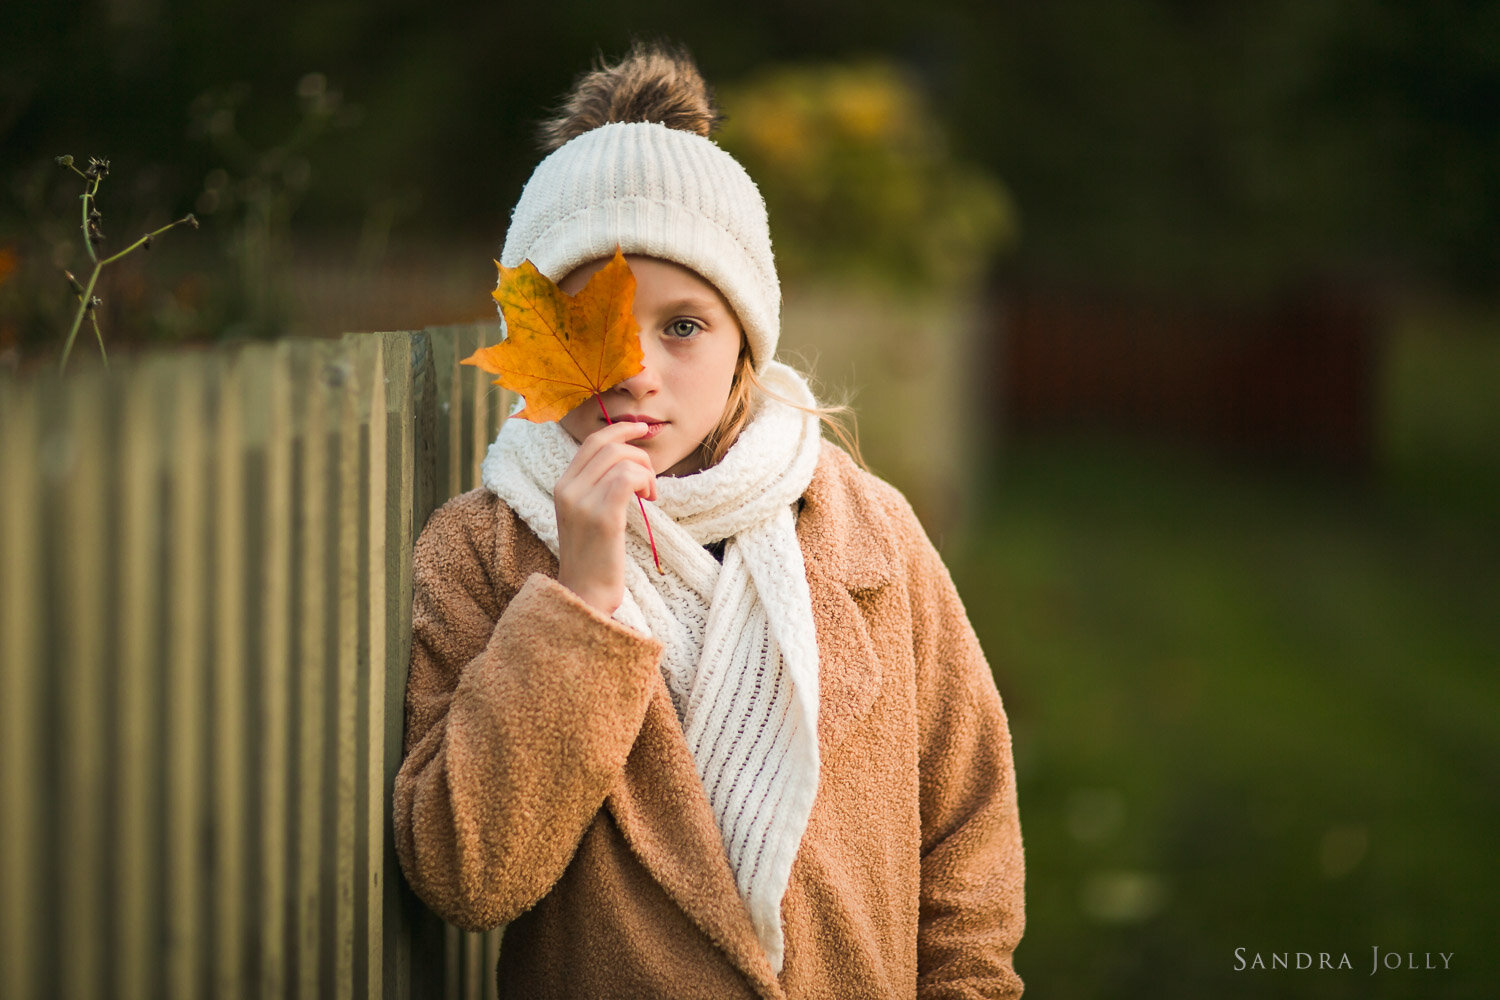 girl-with-leaf-covering-eye-by-sandra-jolly-photography.jpg